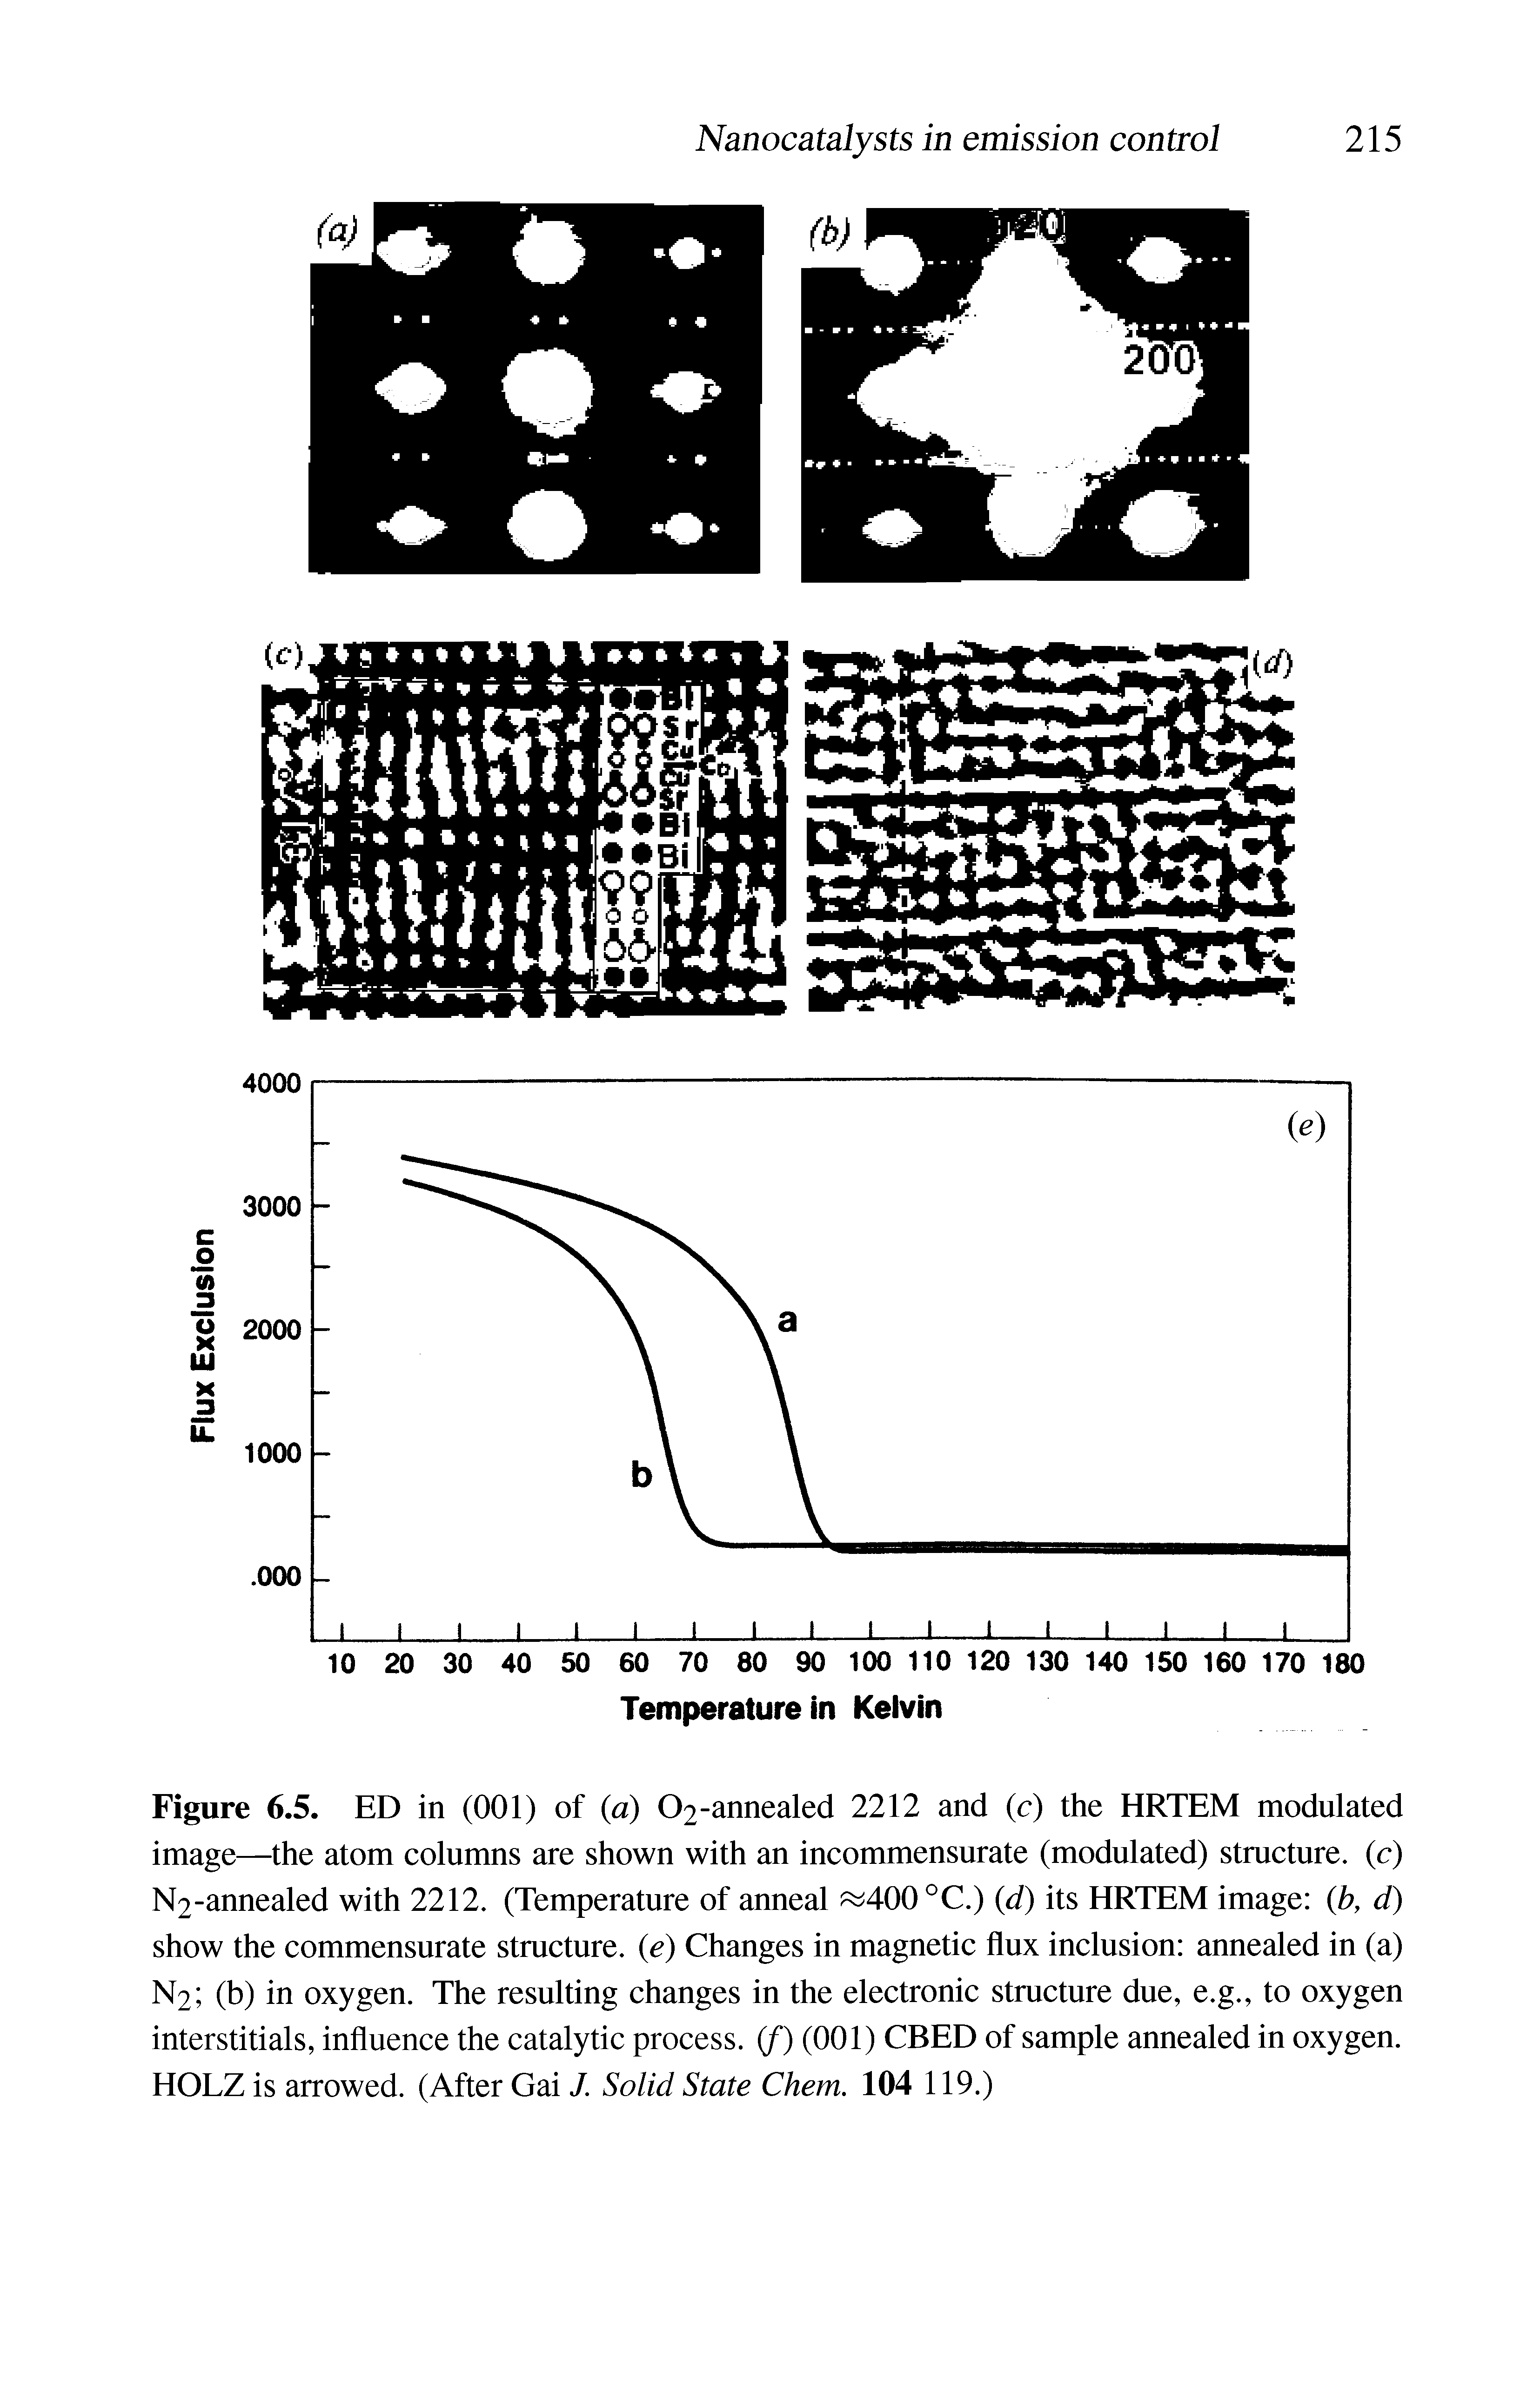 Figure 6.5. ED in (001) of (a) O2-annealed 2212 and (c) the HRTEM modulated image—the atom columns are shown with an incommensurate (modulated) structure, (c) N2-annealed with 2212. (Temperature of anneal 400 °C.) (d) its HRTEM image (/ , d) show the commensurate structure, (e) Changes in magnetic flux inclusion annealed in (a) N2 (b) in oxygen. The resulting changes in the electronic structure due, e.g., to oxygen interstitials, influence the catalytic process, (f) (001) CBED of sample annealed in oxygen. HOLZ is arrowed. (After Gai J. Solid State Chem. 104 119.)...